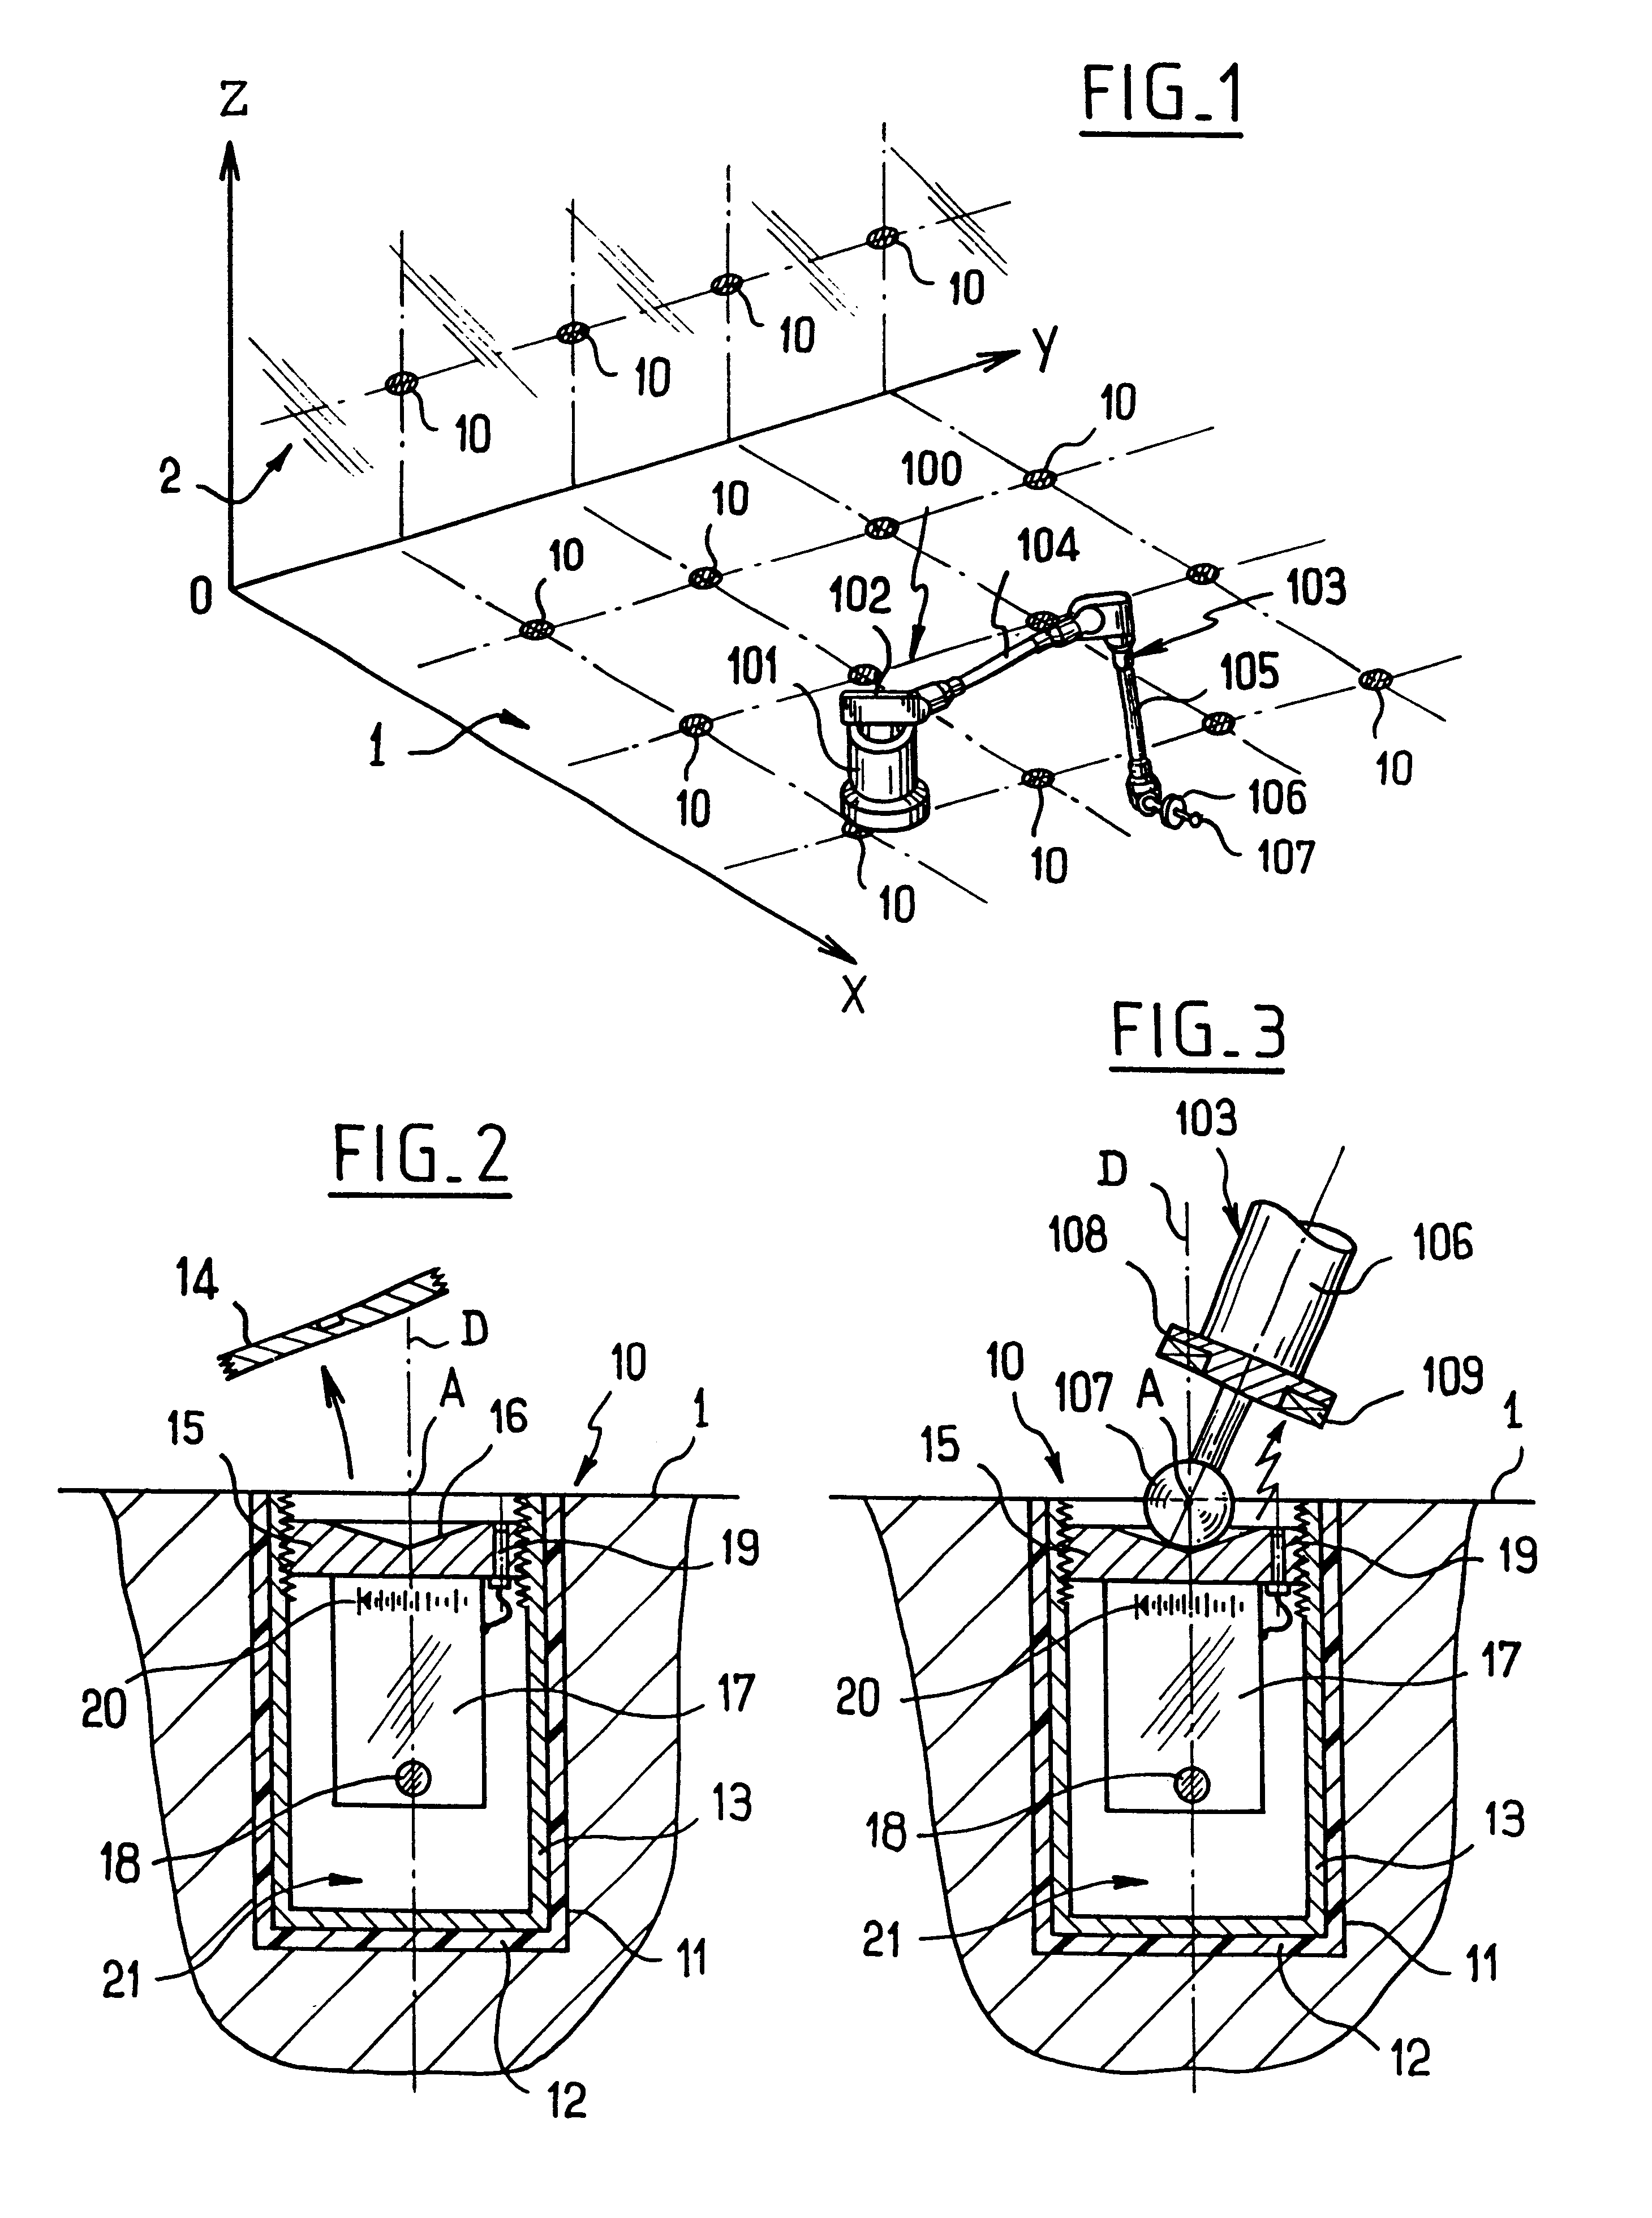 System for identifying the position of a three-dimensional machine in a fixed frame of reference